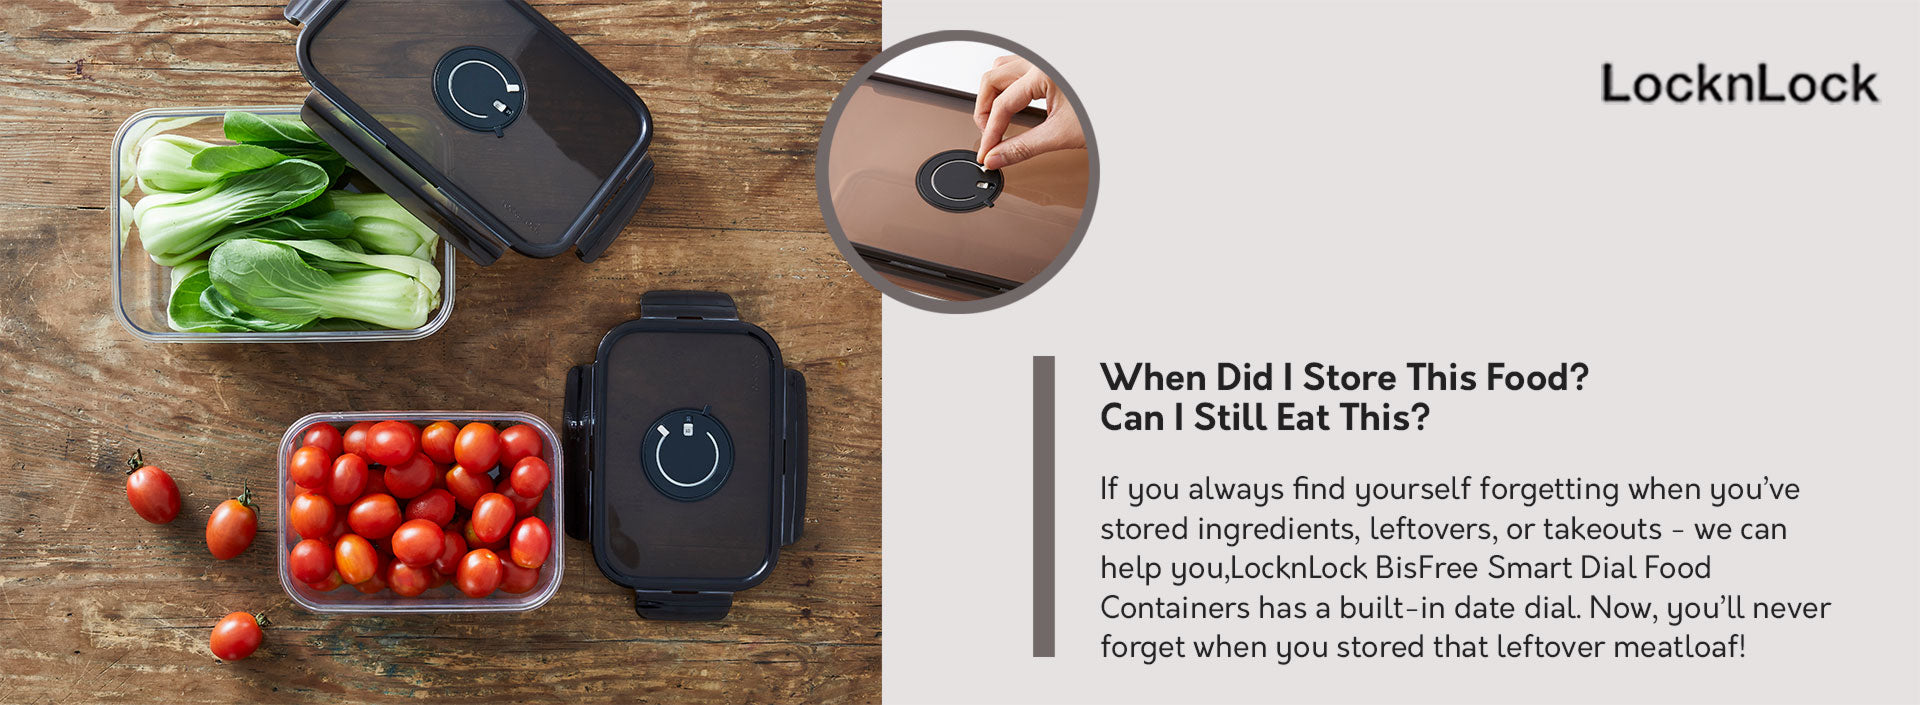 LocknLock Smart Dial Food Containers to Keep Food Fresh